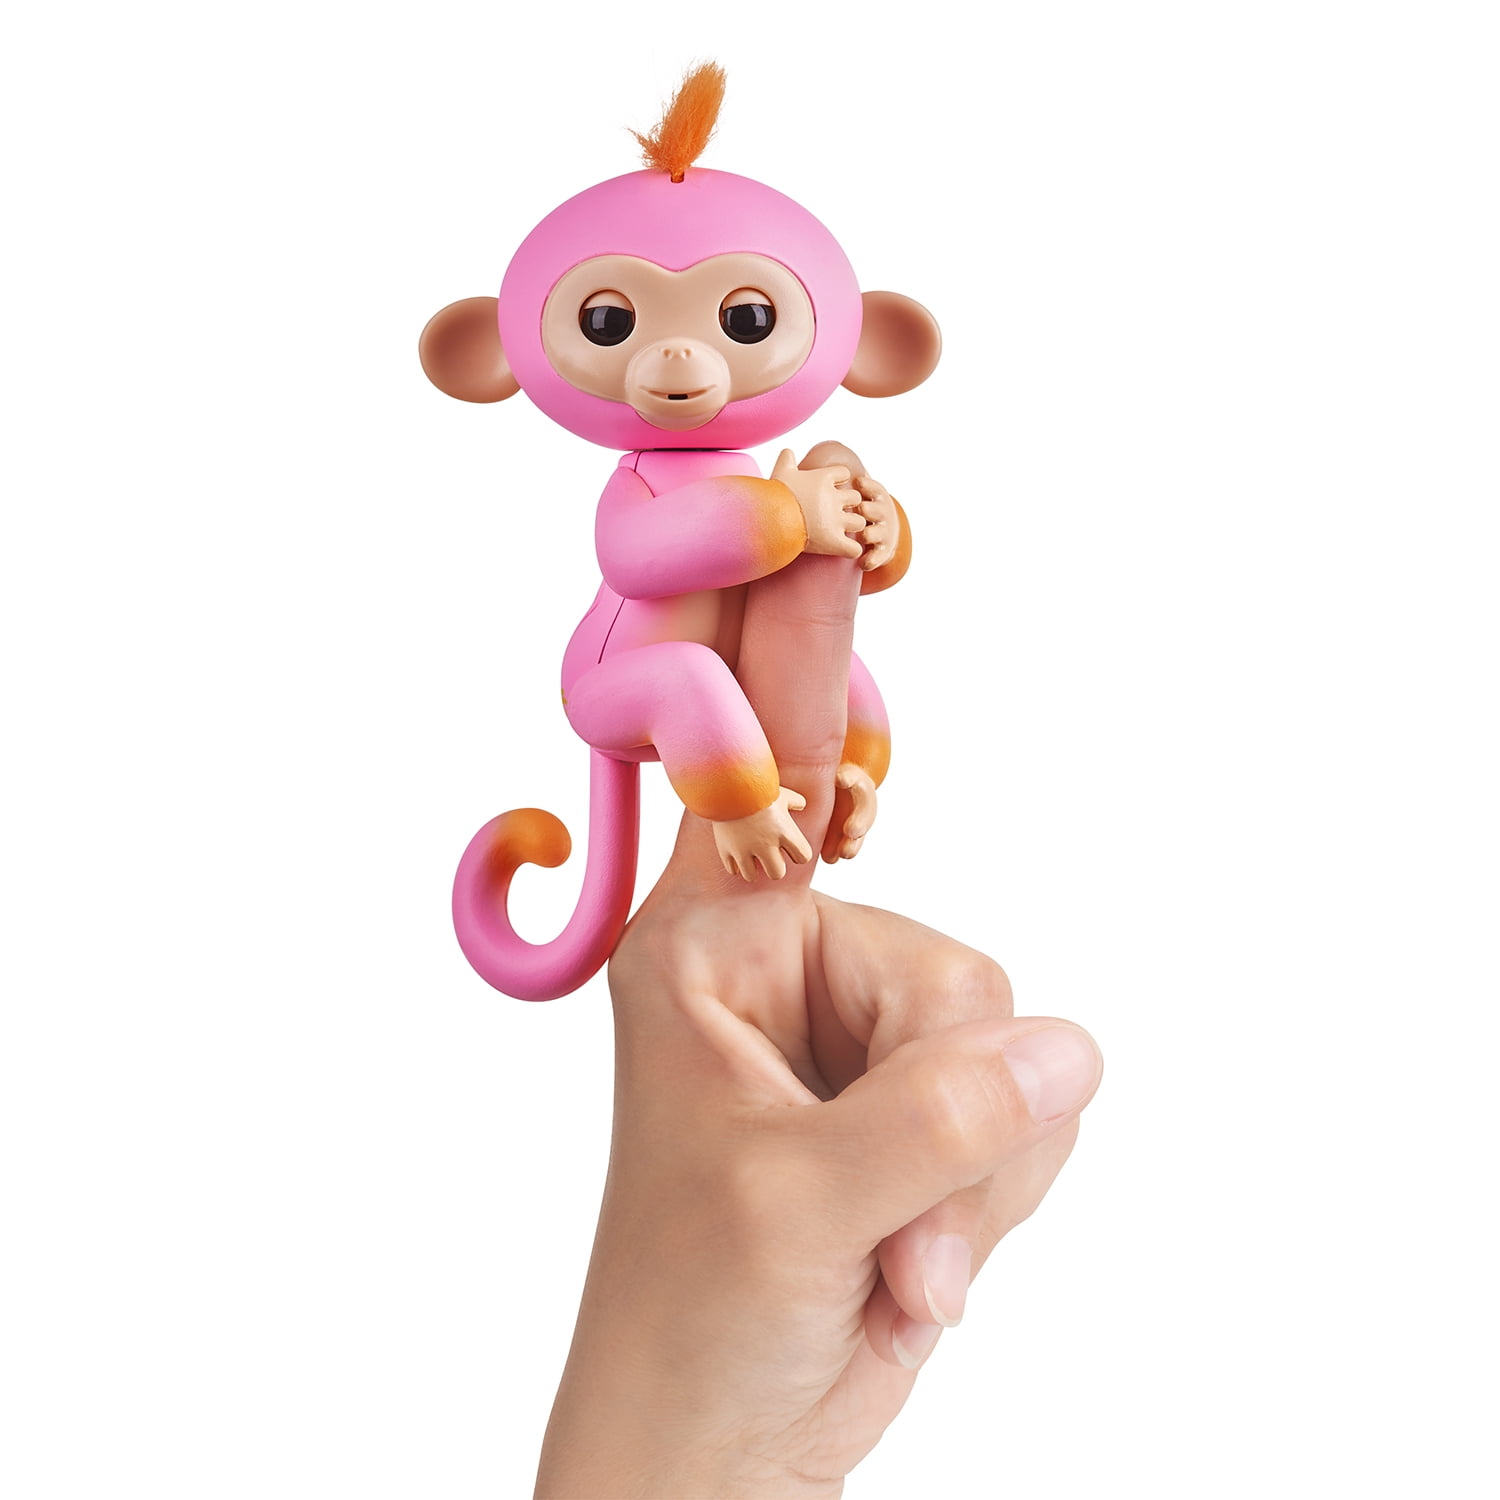 Bella Fingerling WowWee Monkey Fingerlings Authentic Pink with Yellow Hair 